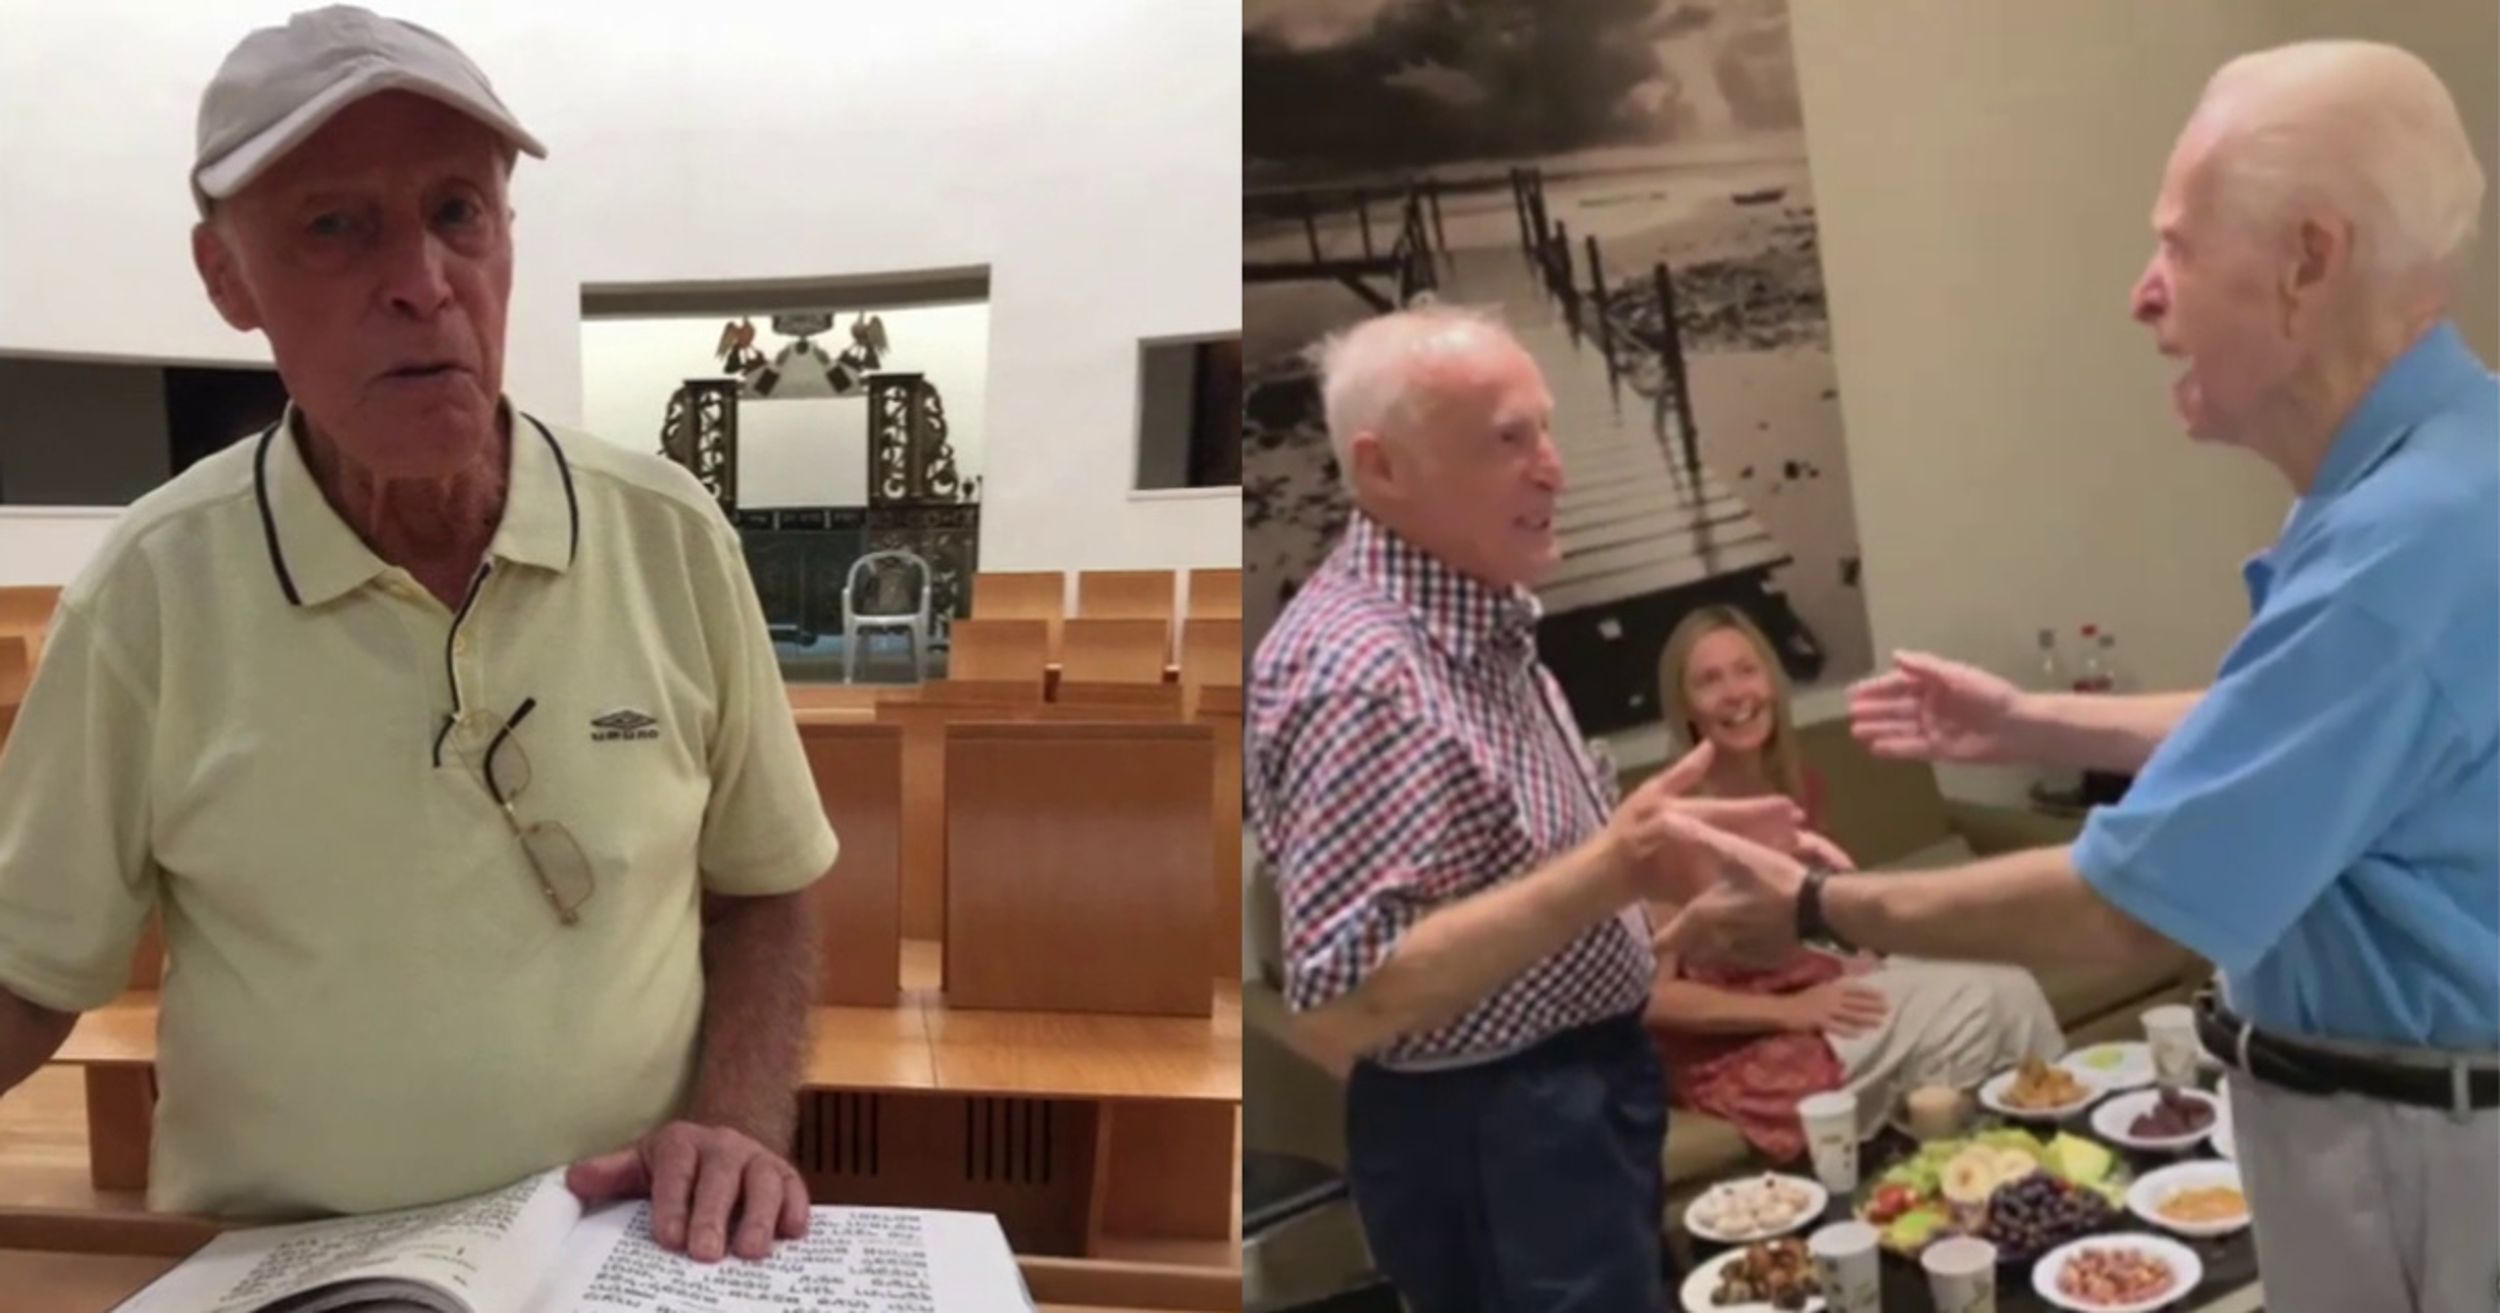 87-Year-Old Holocaust Survivor Has Emotional Reunion With His Long-Lost Cousin 75 Years Later